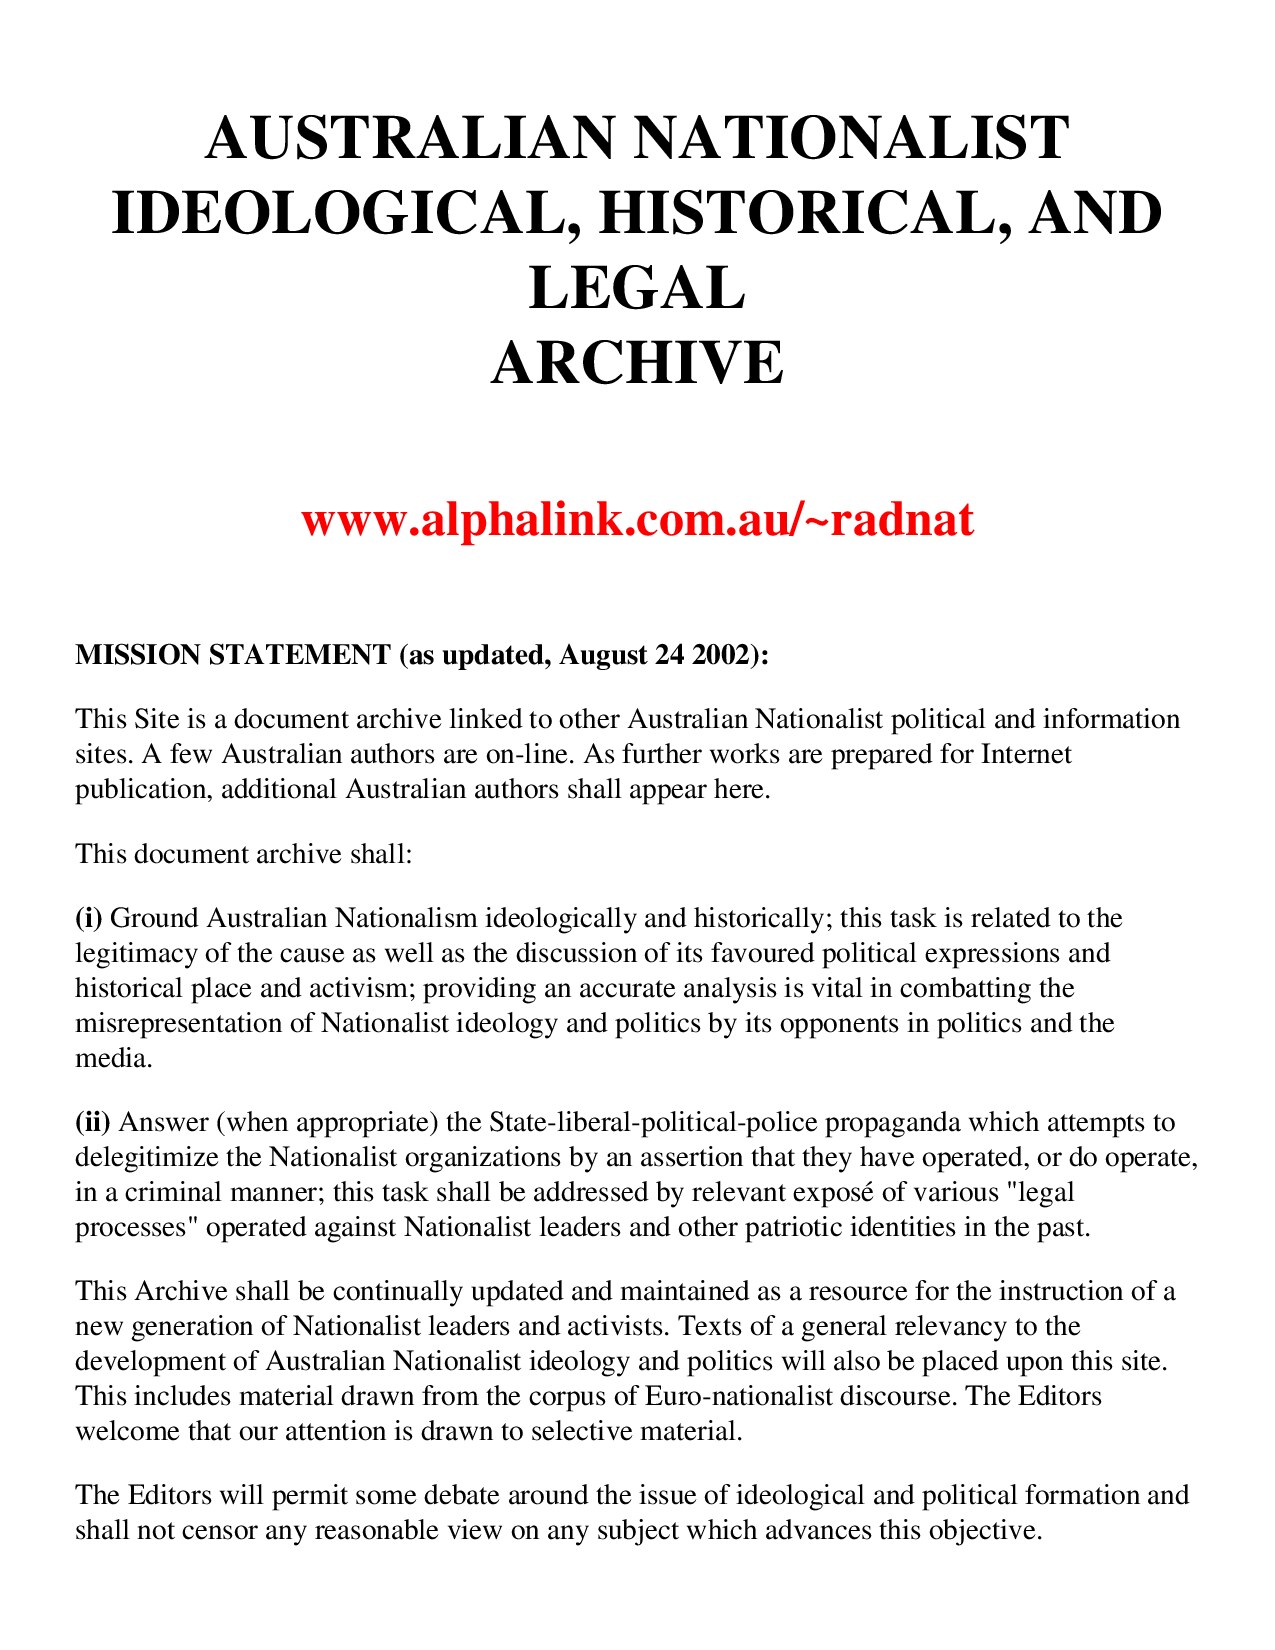 Australian Nationalist Idelogical, Historical, And Legal Archive 